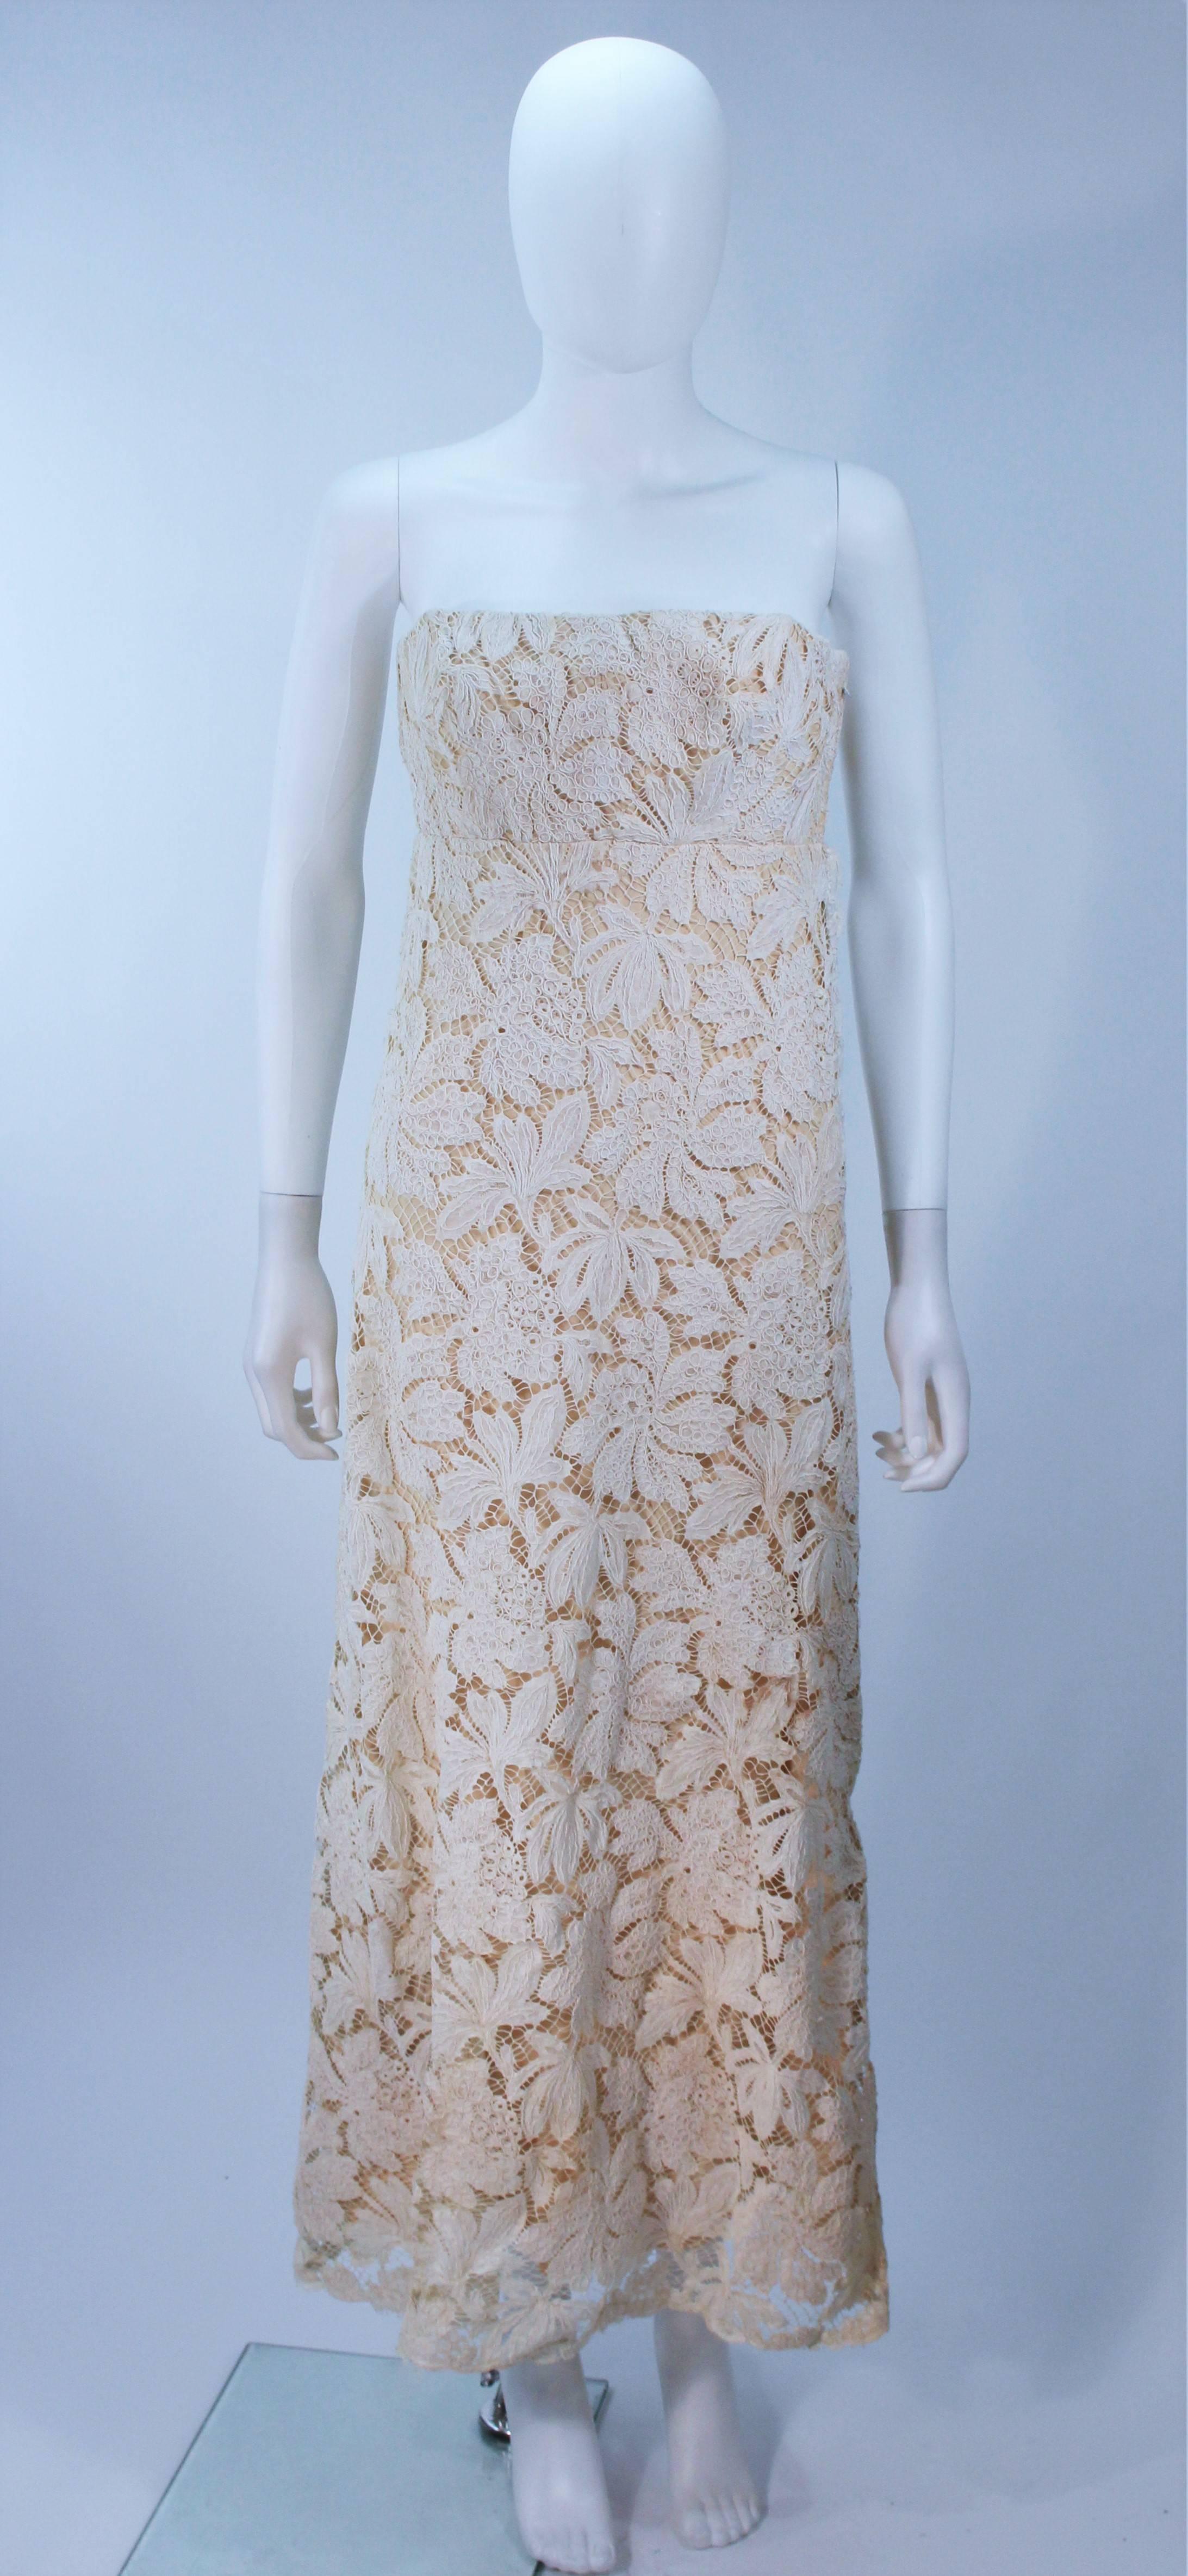  This Galanos  dress is composed of an off white-cream hue floral patterned lace with silk lining. There is a side zipper closure. In excellent great condition, the material is in an antique state and relatively fragile due to age. 

  **Please